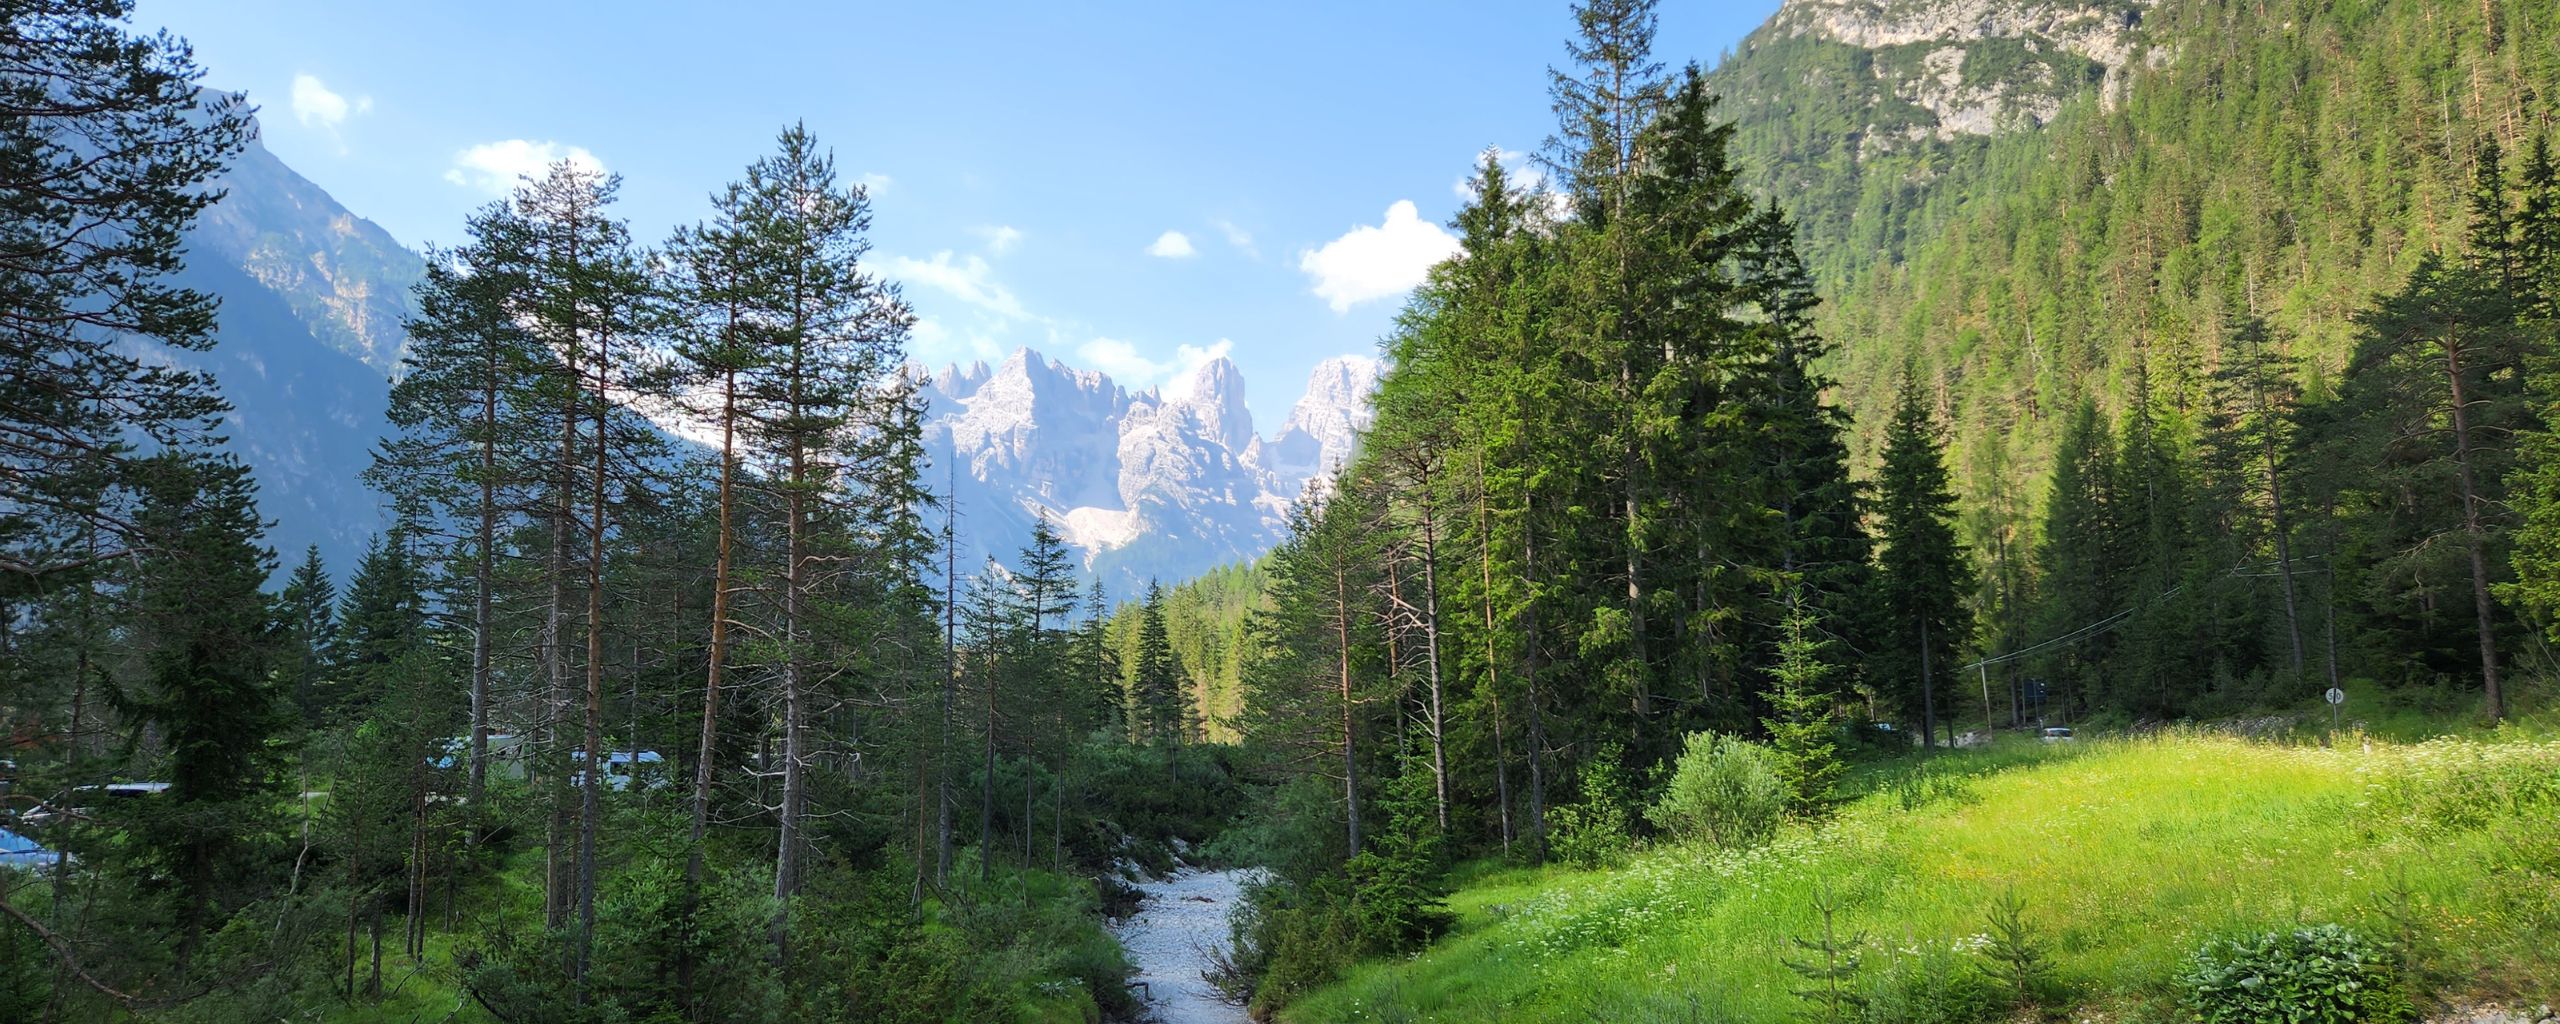 Italy's Dolomites are best seen by bicycle with ExperiencePlus